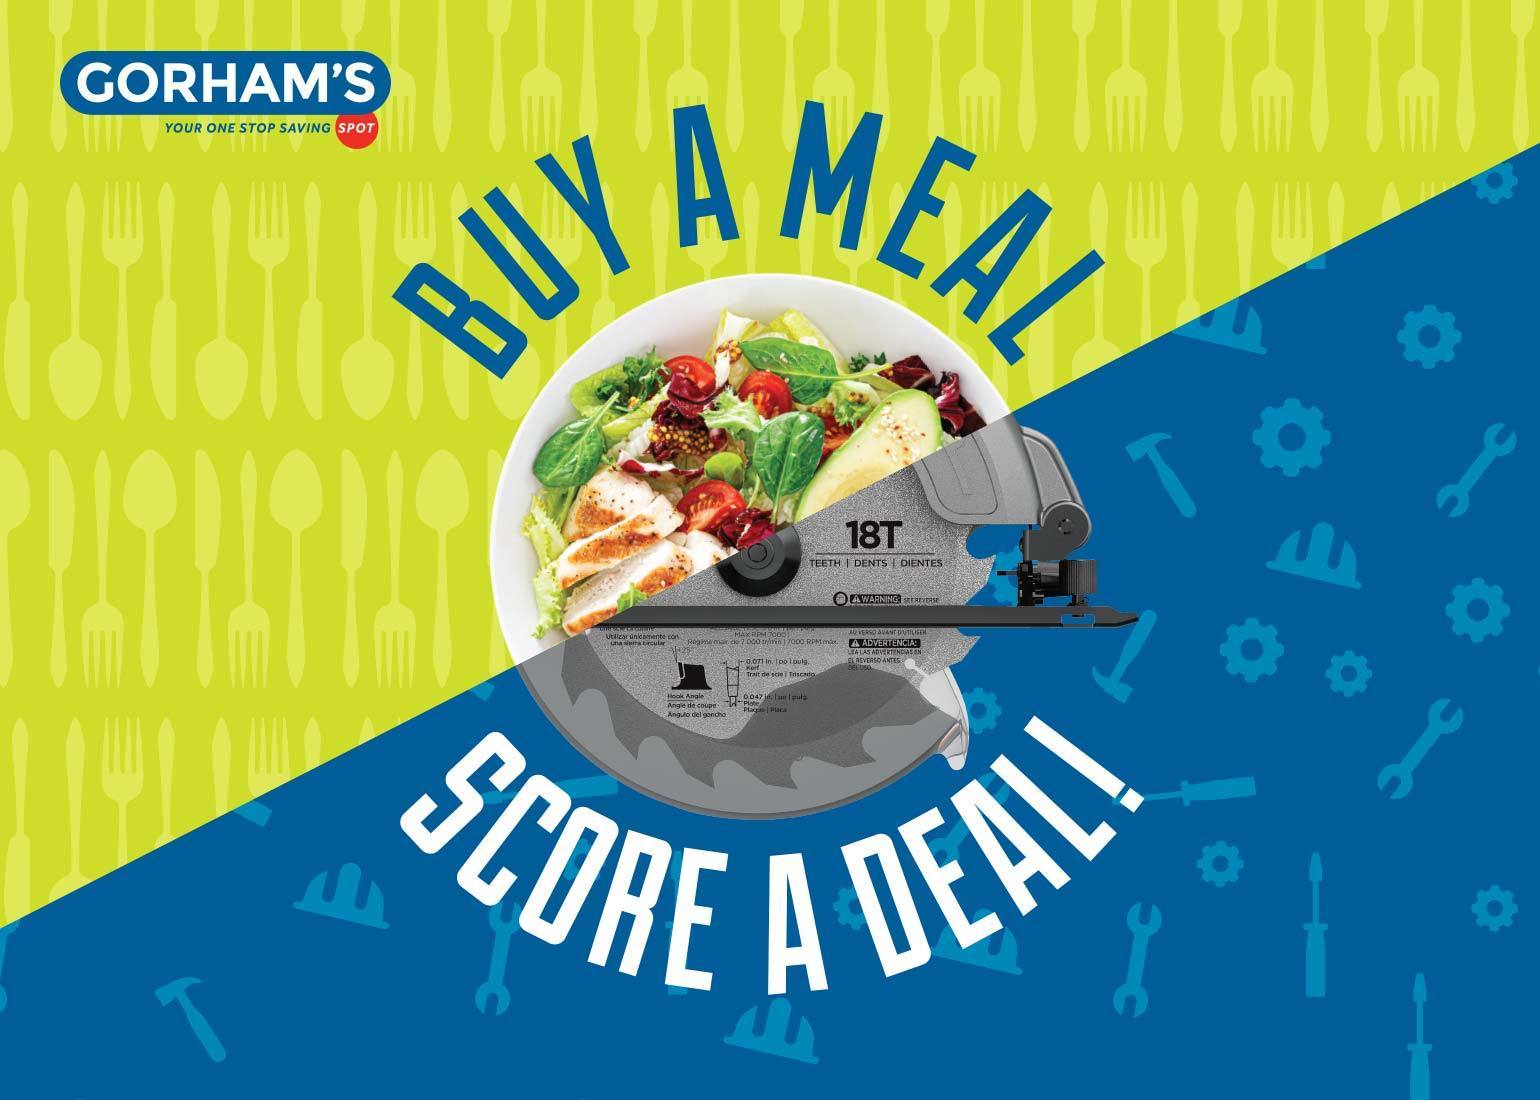 Gorham's Buy a Meal, Score a Deal!